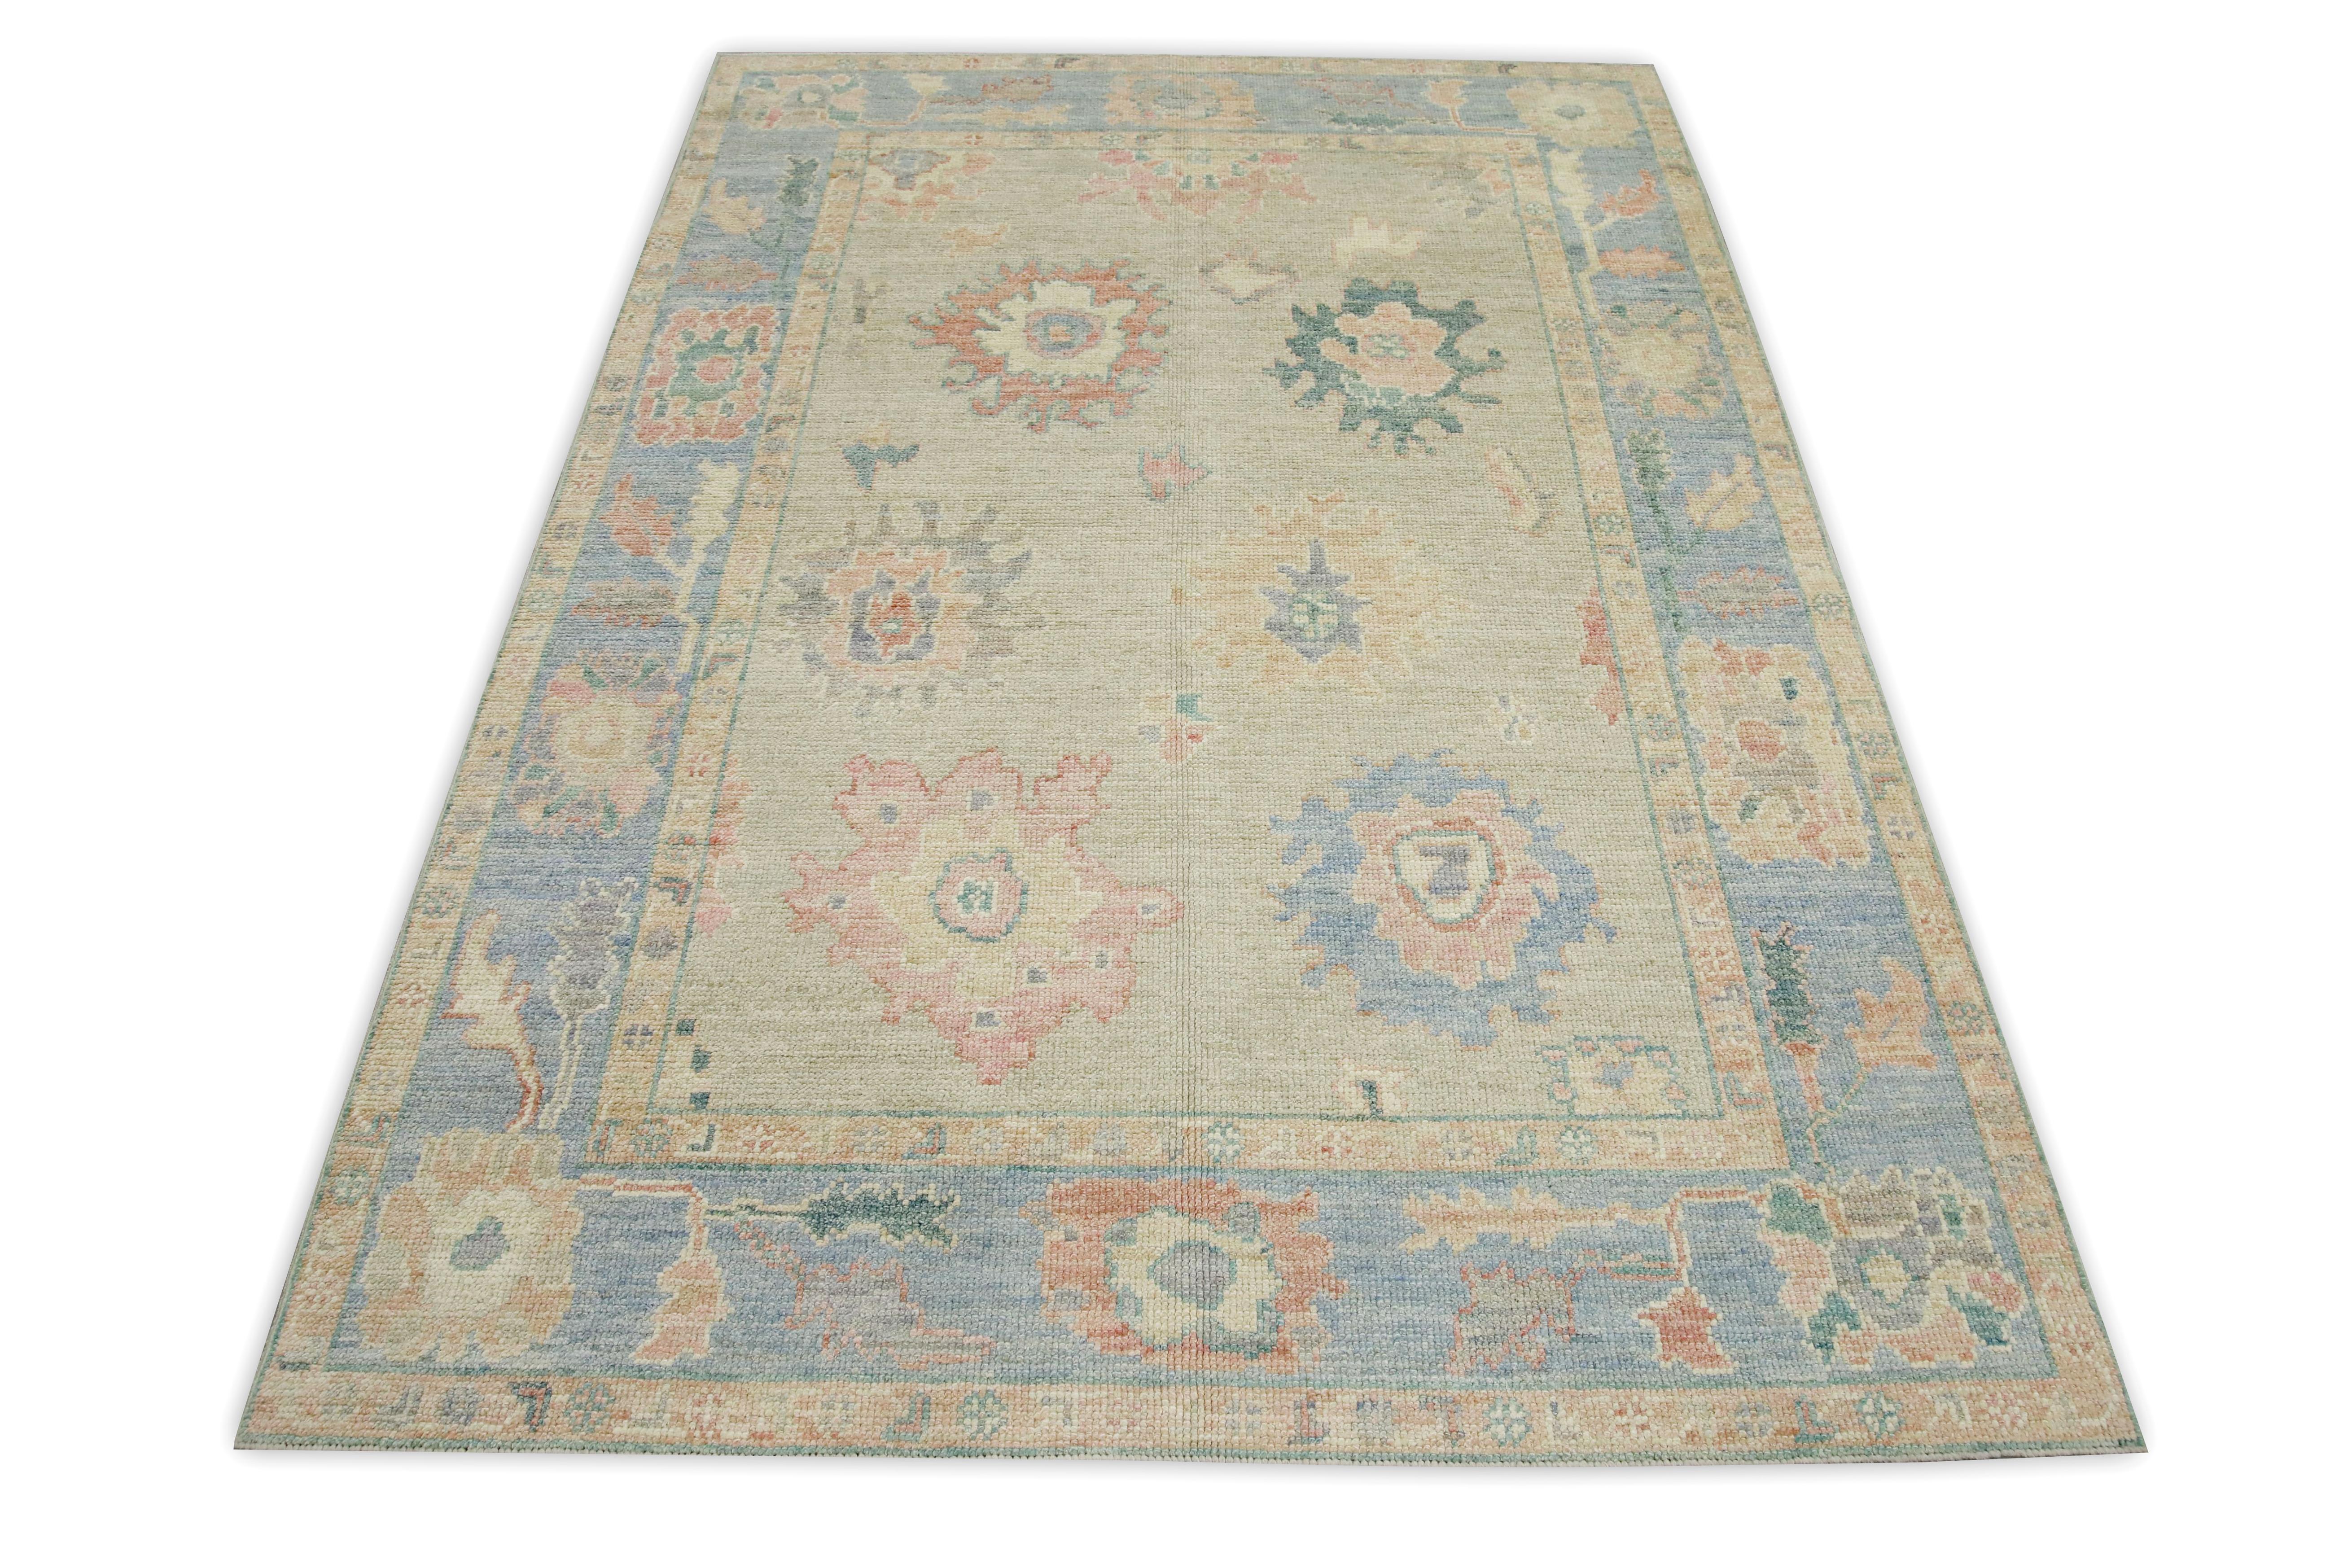 Contemporary Blue & Pink Floral Design Handwoven Wool Turkish Oushak Rug 5' x 6'11